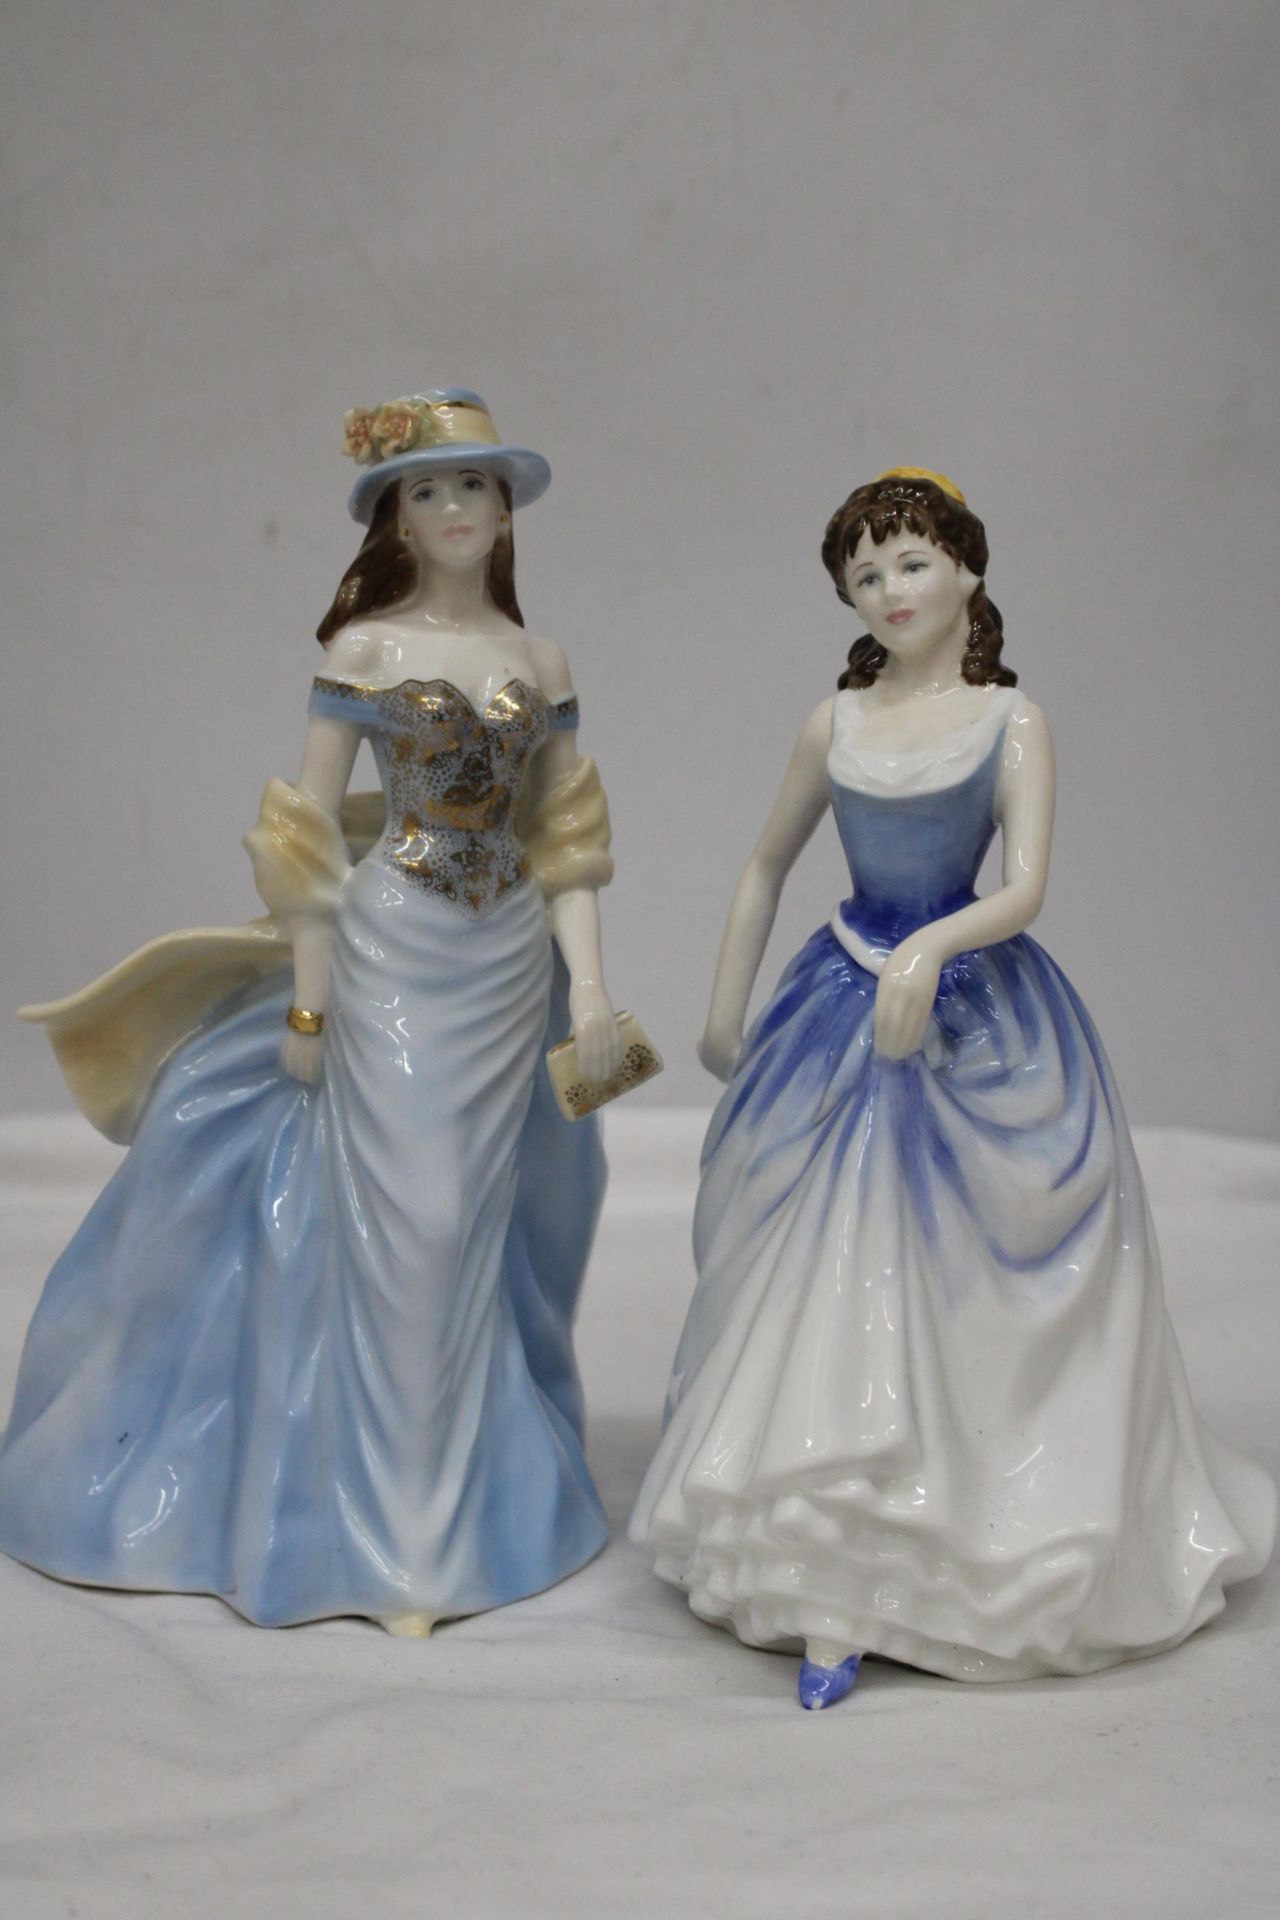 A ROYAL DOULTON FIGURE "MICHELLE" HN 4158 AND A ROYAL WOICESTER FIGURE "LOUISE" - Image 2 of 7